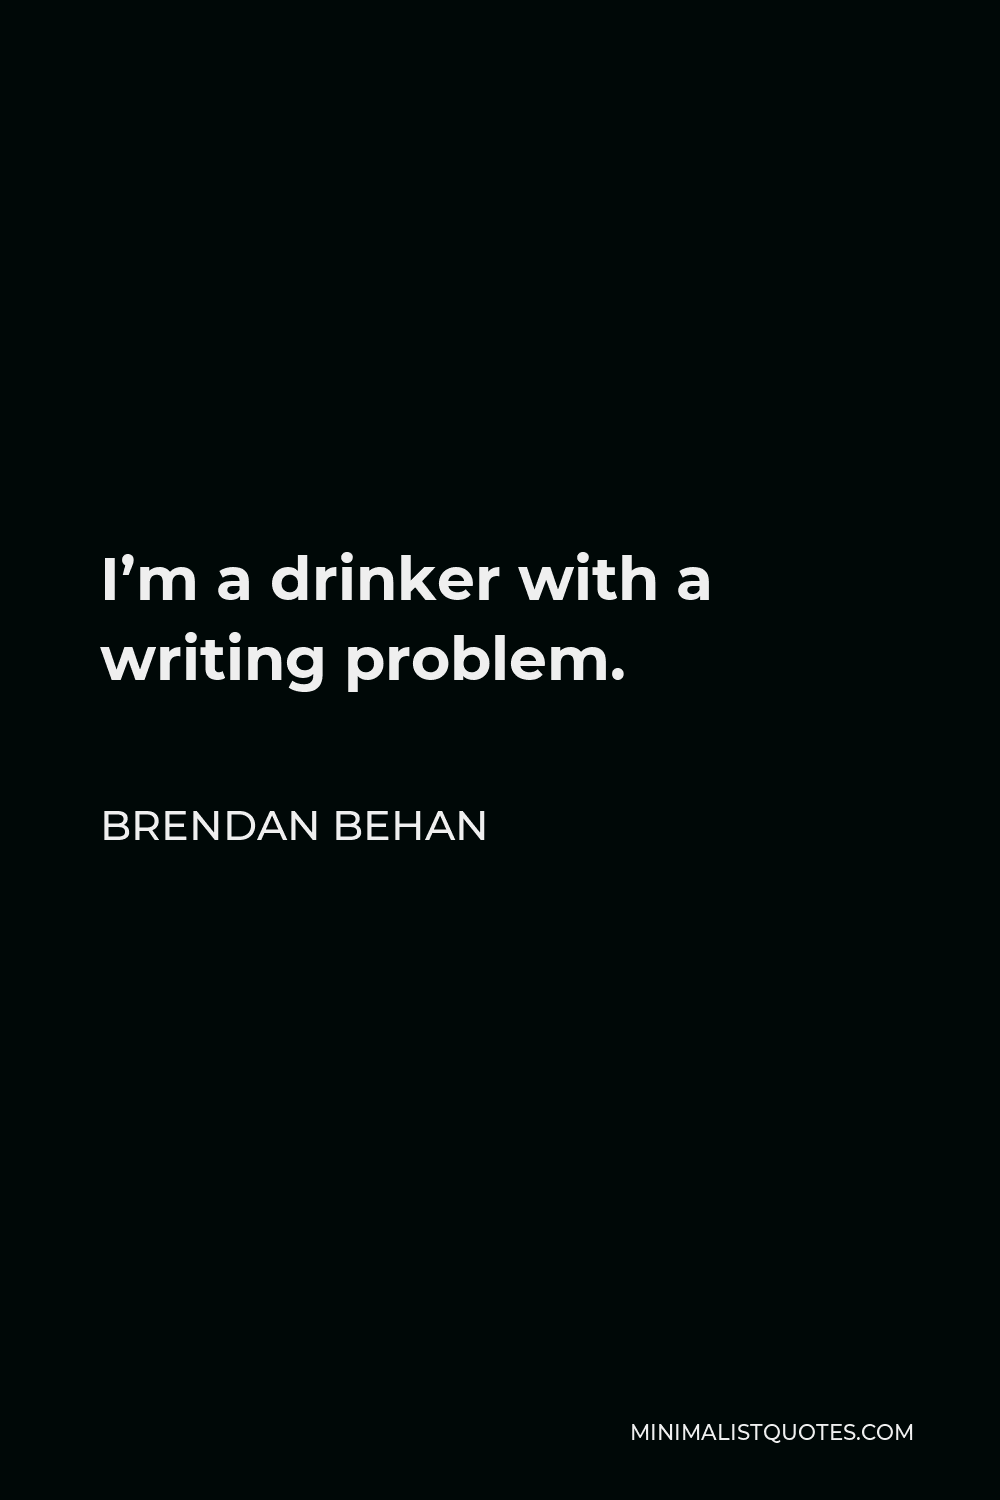 Brendan Behan Quote - I’m a drinker with a writing problem.